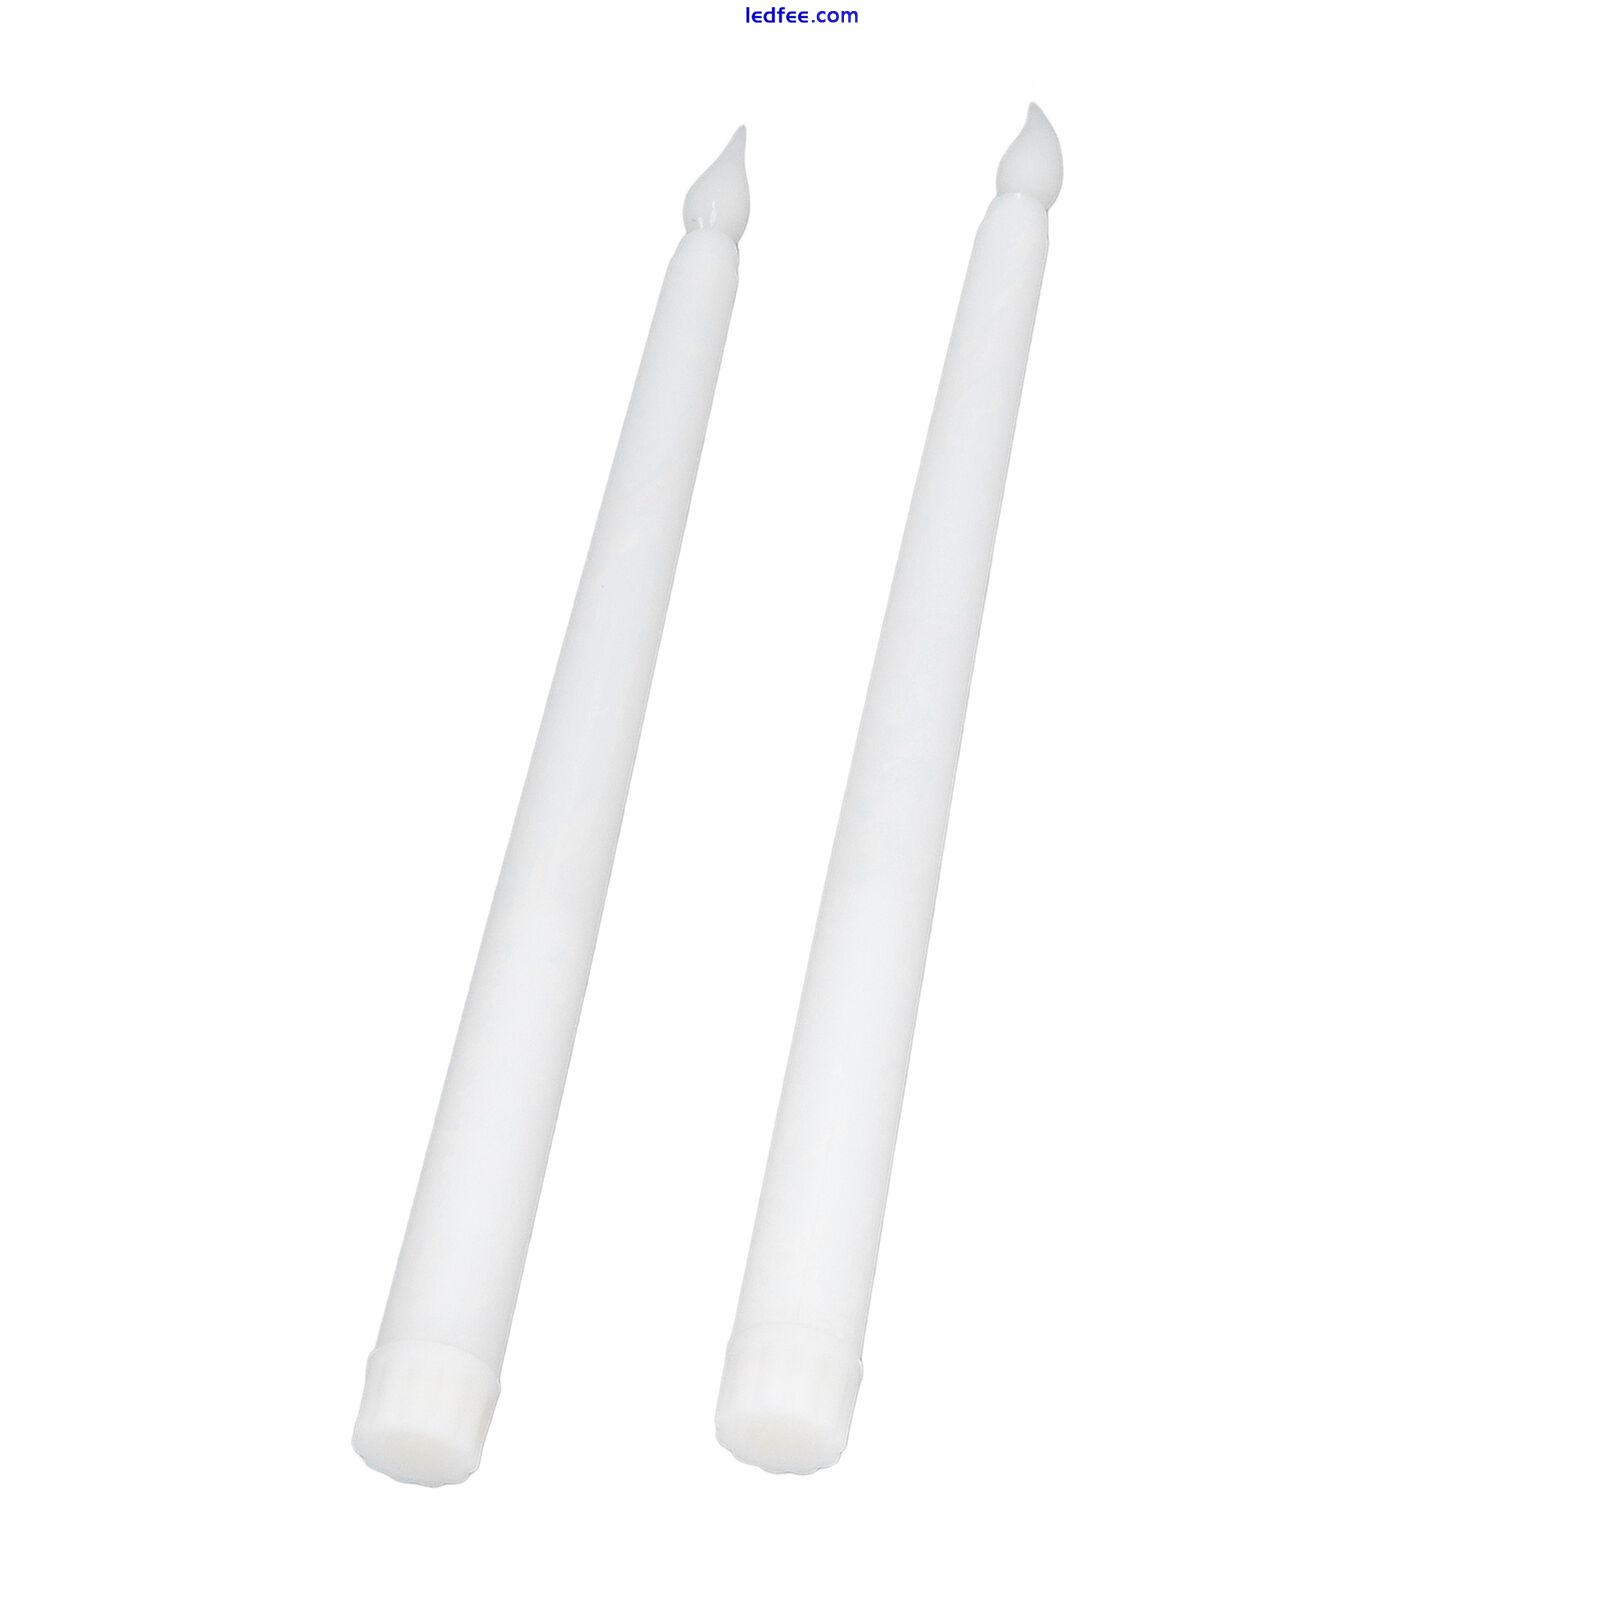 2pcs LED Taper Candles Battery Powered Flameless LED Candle 1 